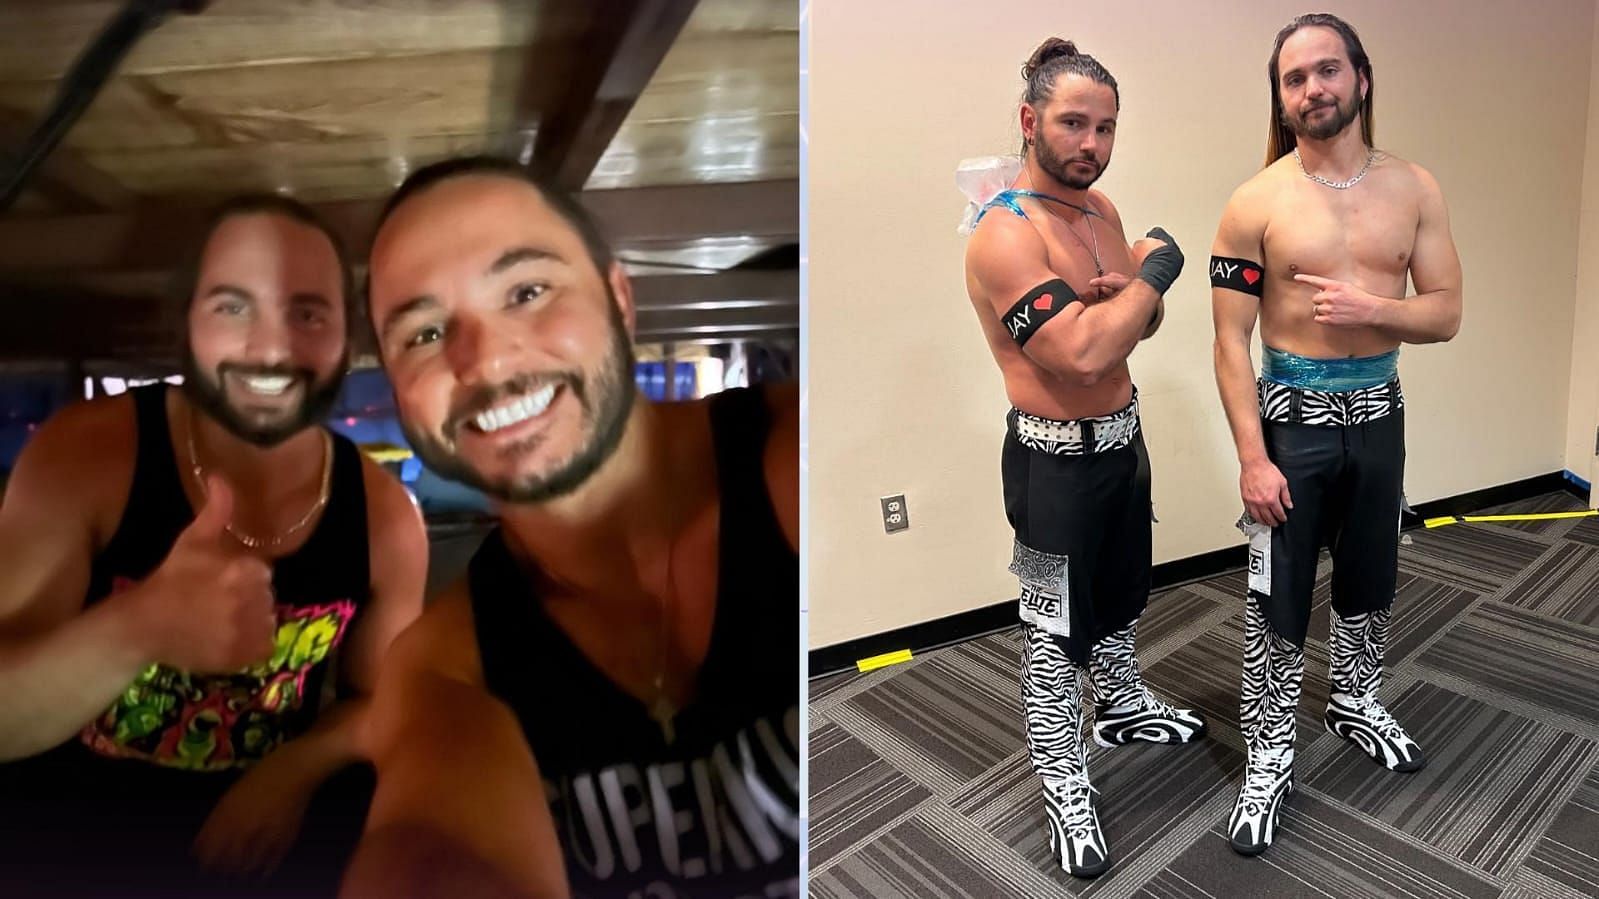 The Young Bucks are former AEW World Tag Team Champions